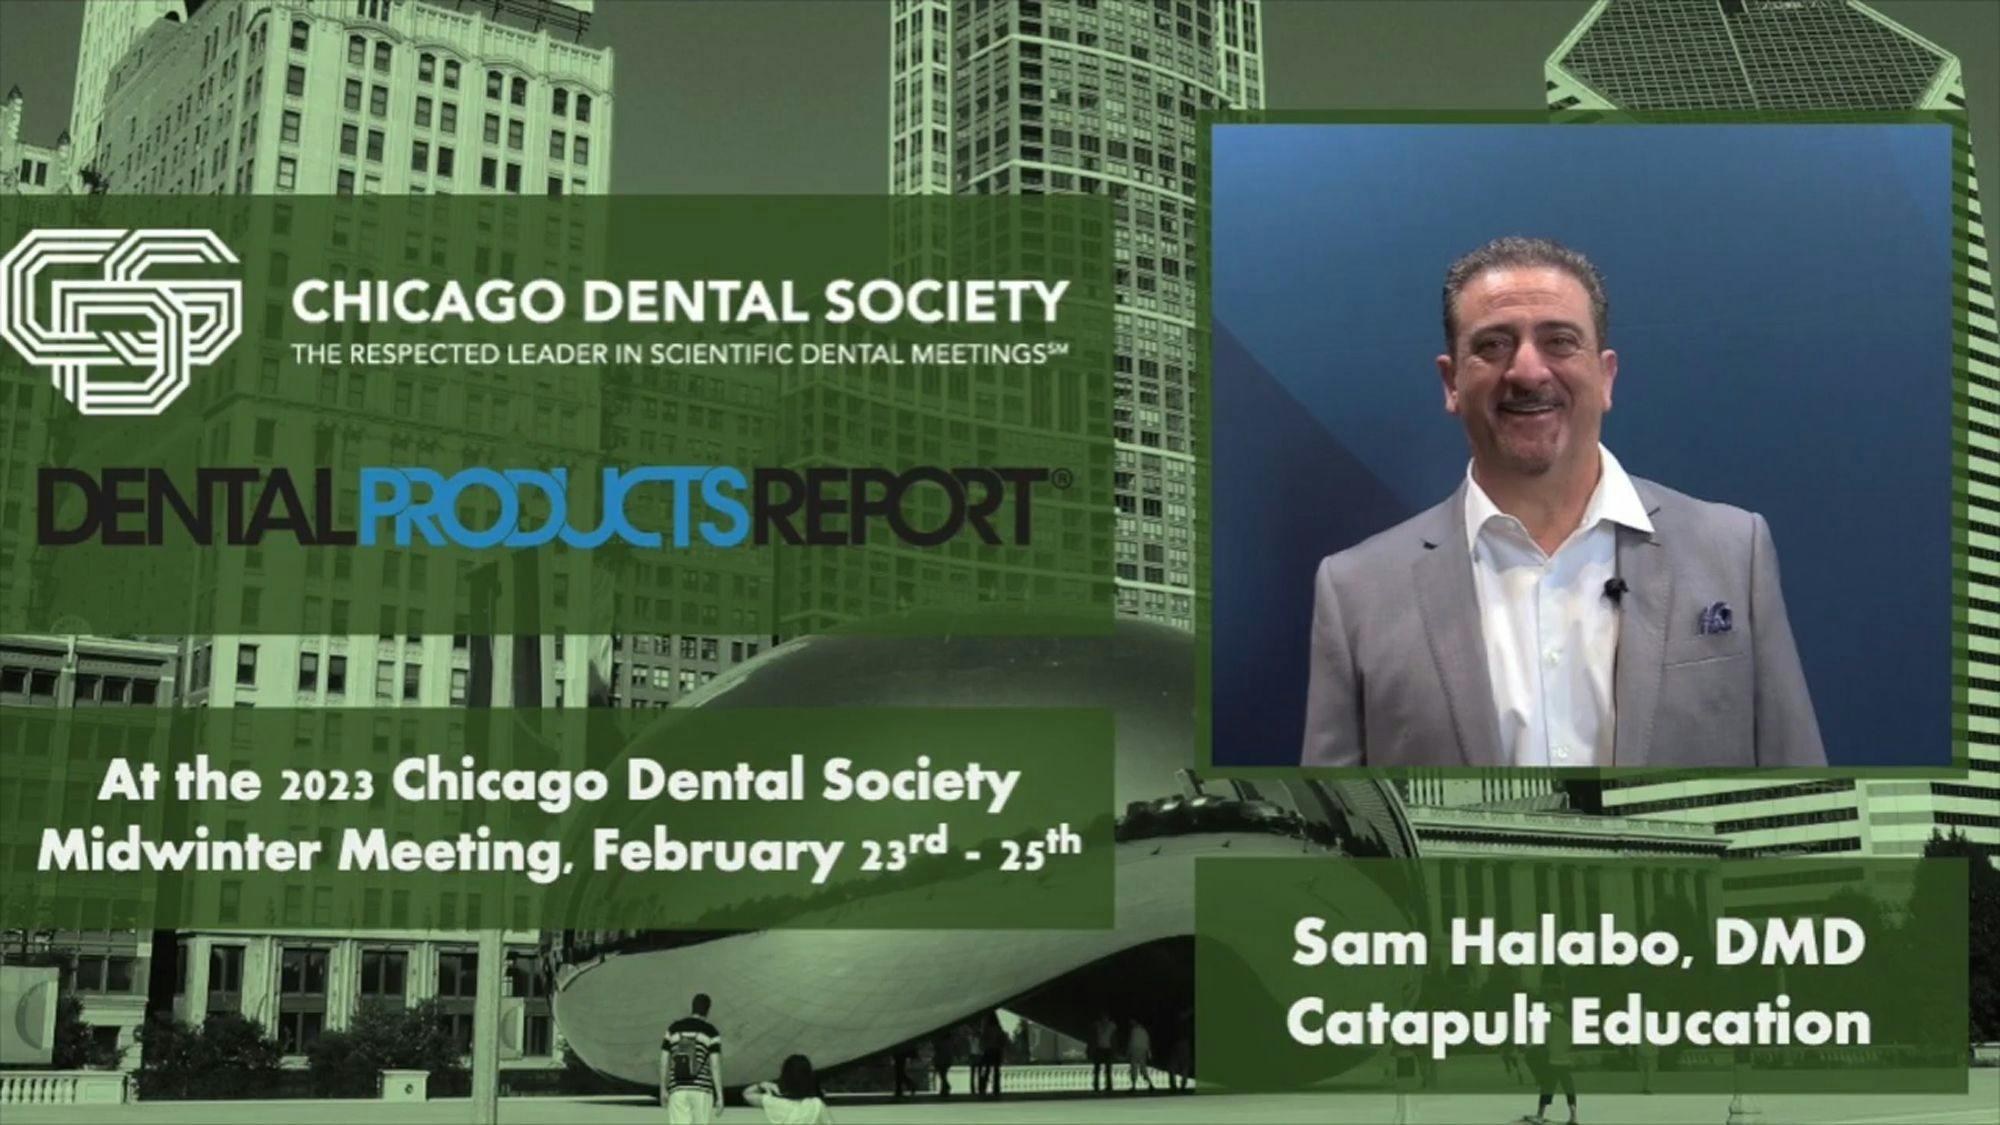 2023 Chicago Dental Society Midwinter Meeting, Interview with Sam Halabo, DMD, Catapult Educator